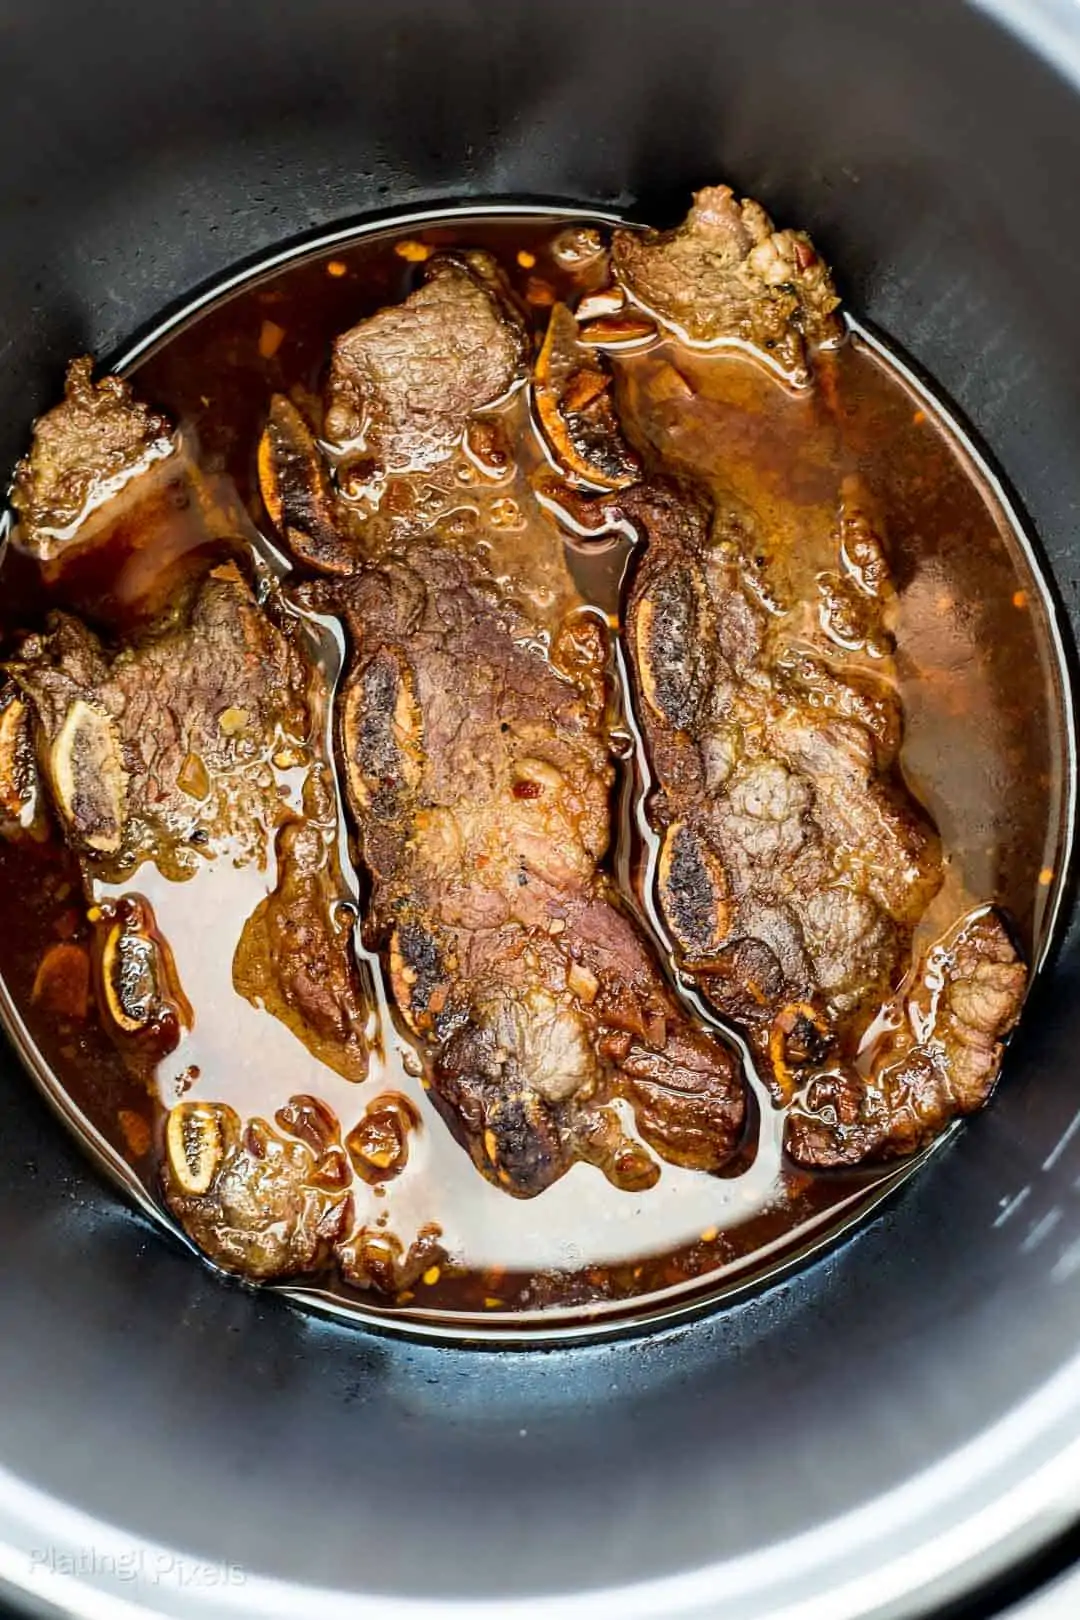 Just cooked Korean Short Ribs in an Instant Pot